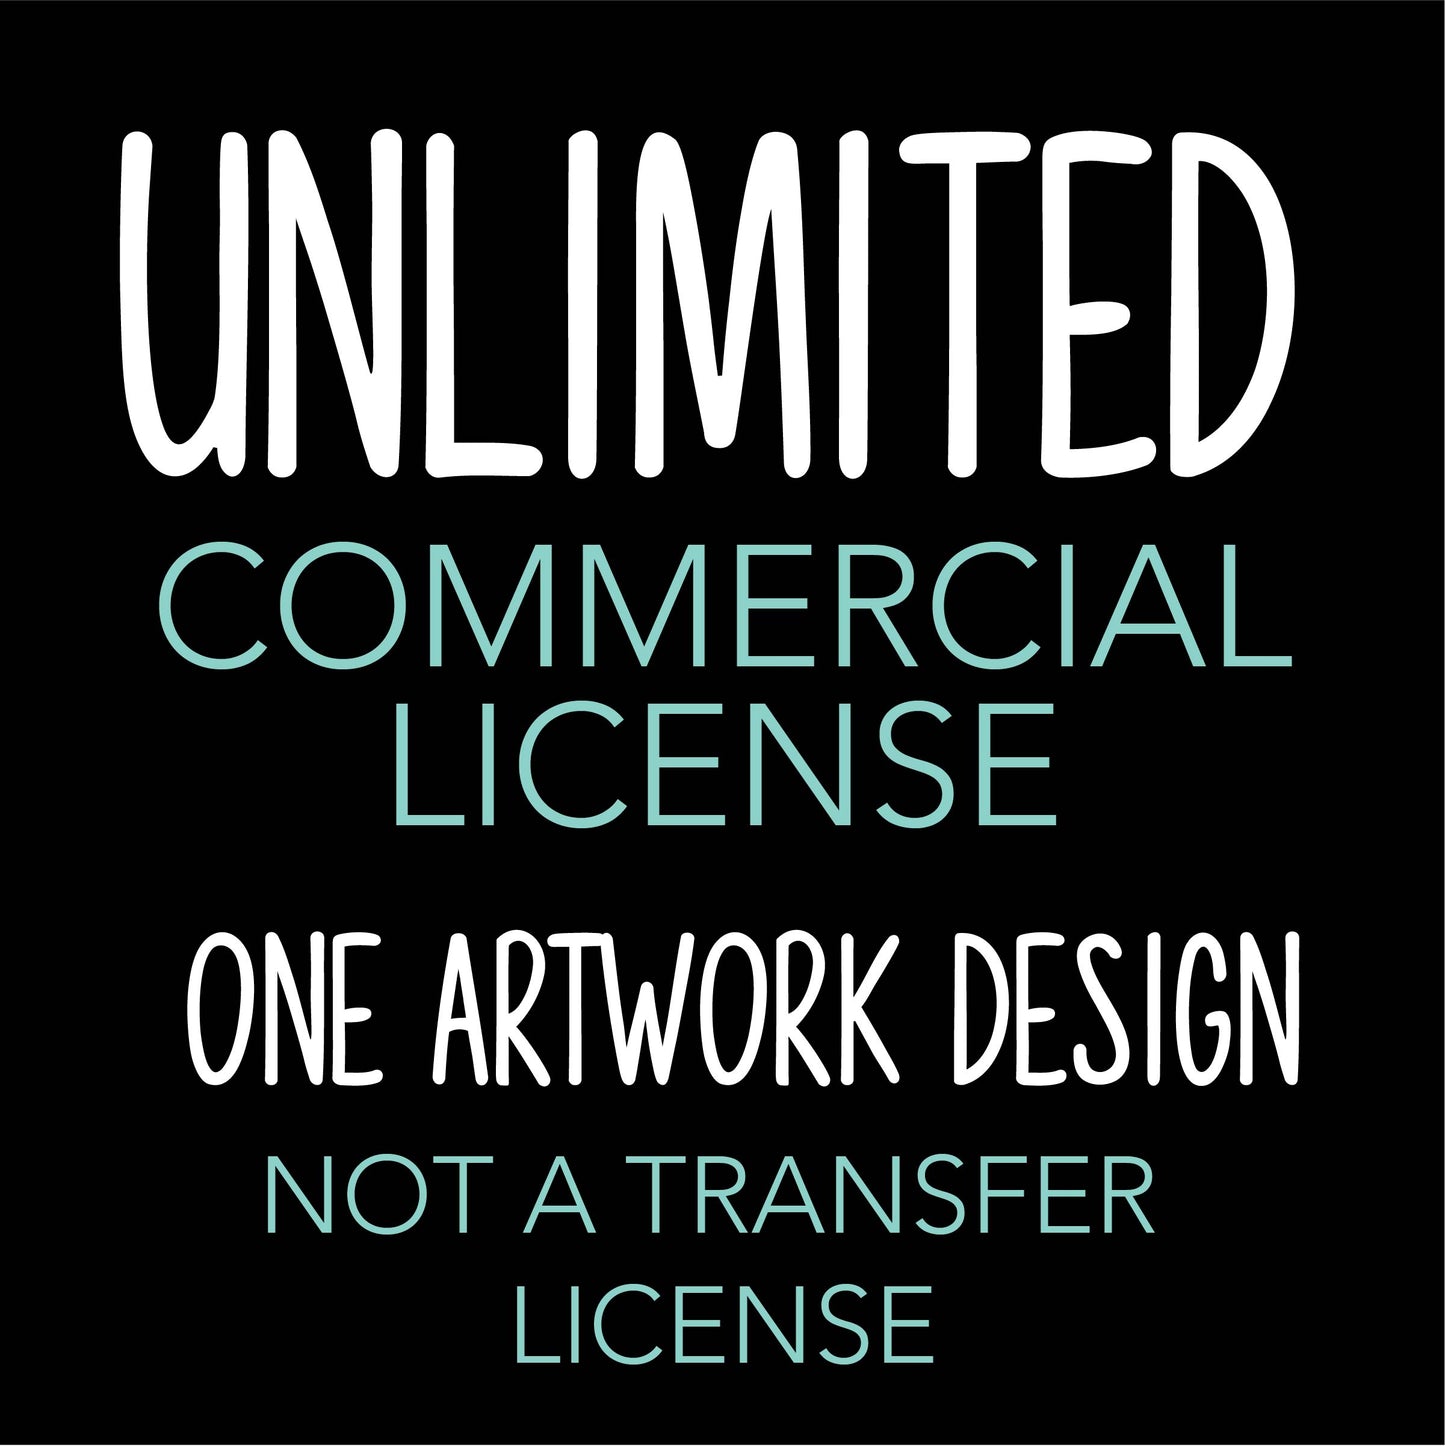 Extended Small Business Use License-UNLIMITED- End use product only.  NOT A TRANSFER LICENSE. 🚩Coupon Use not permitted!